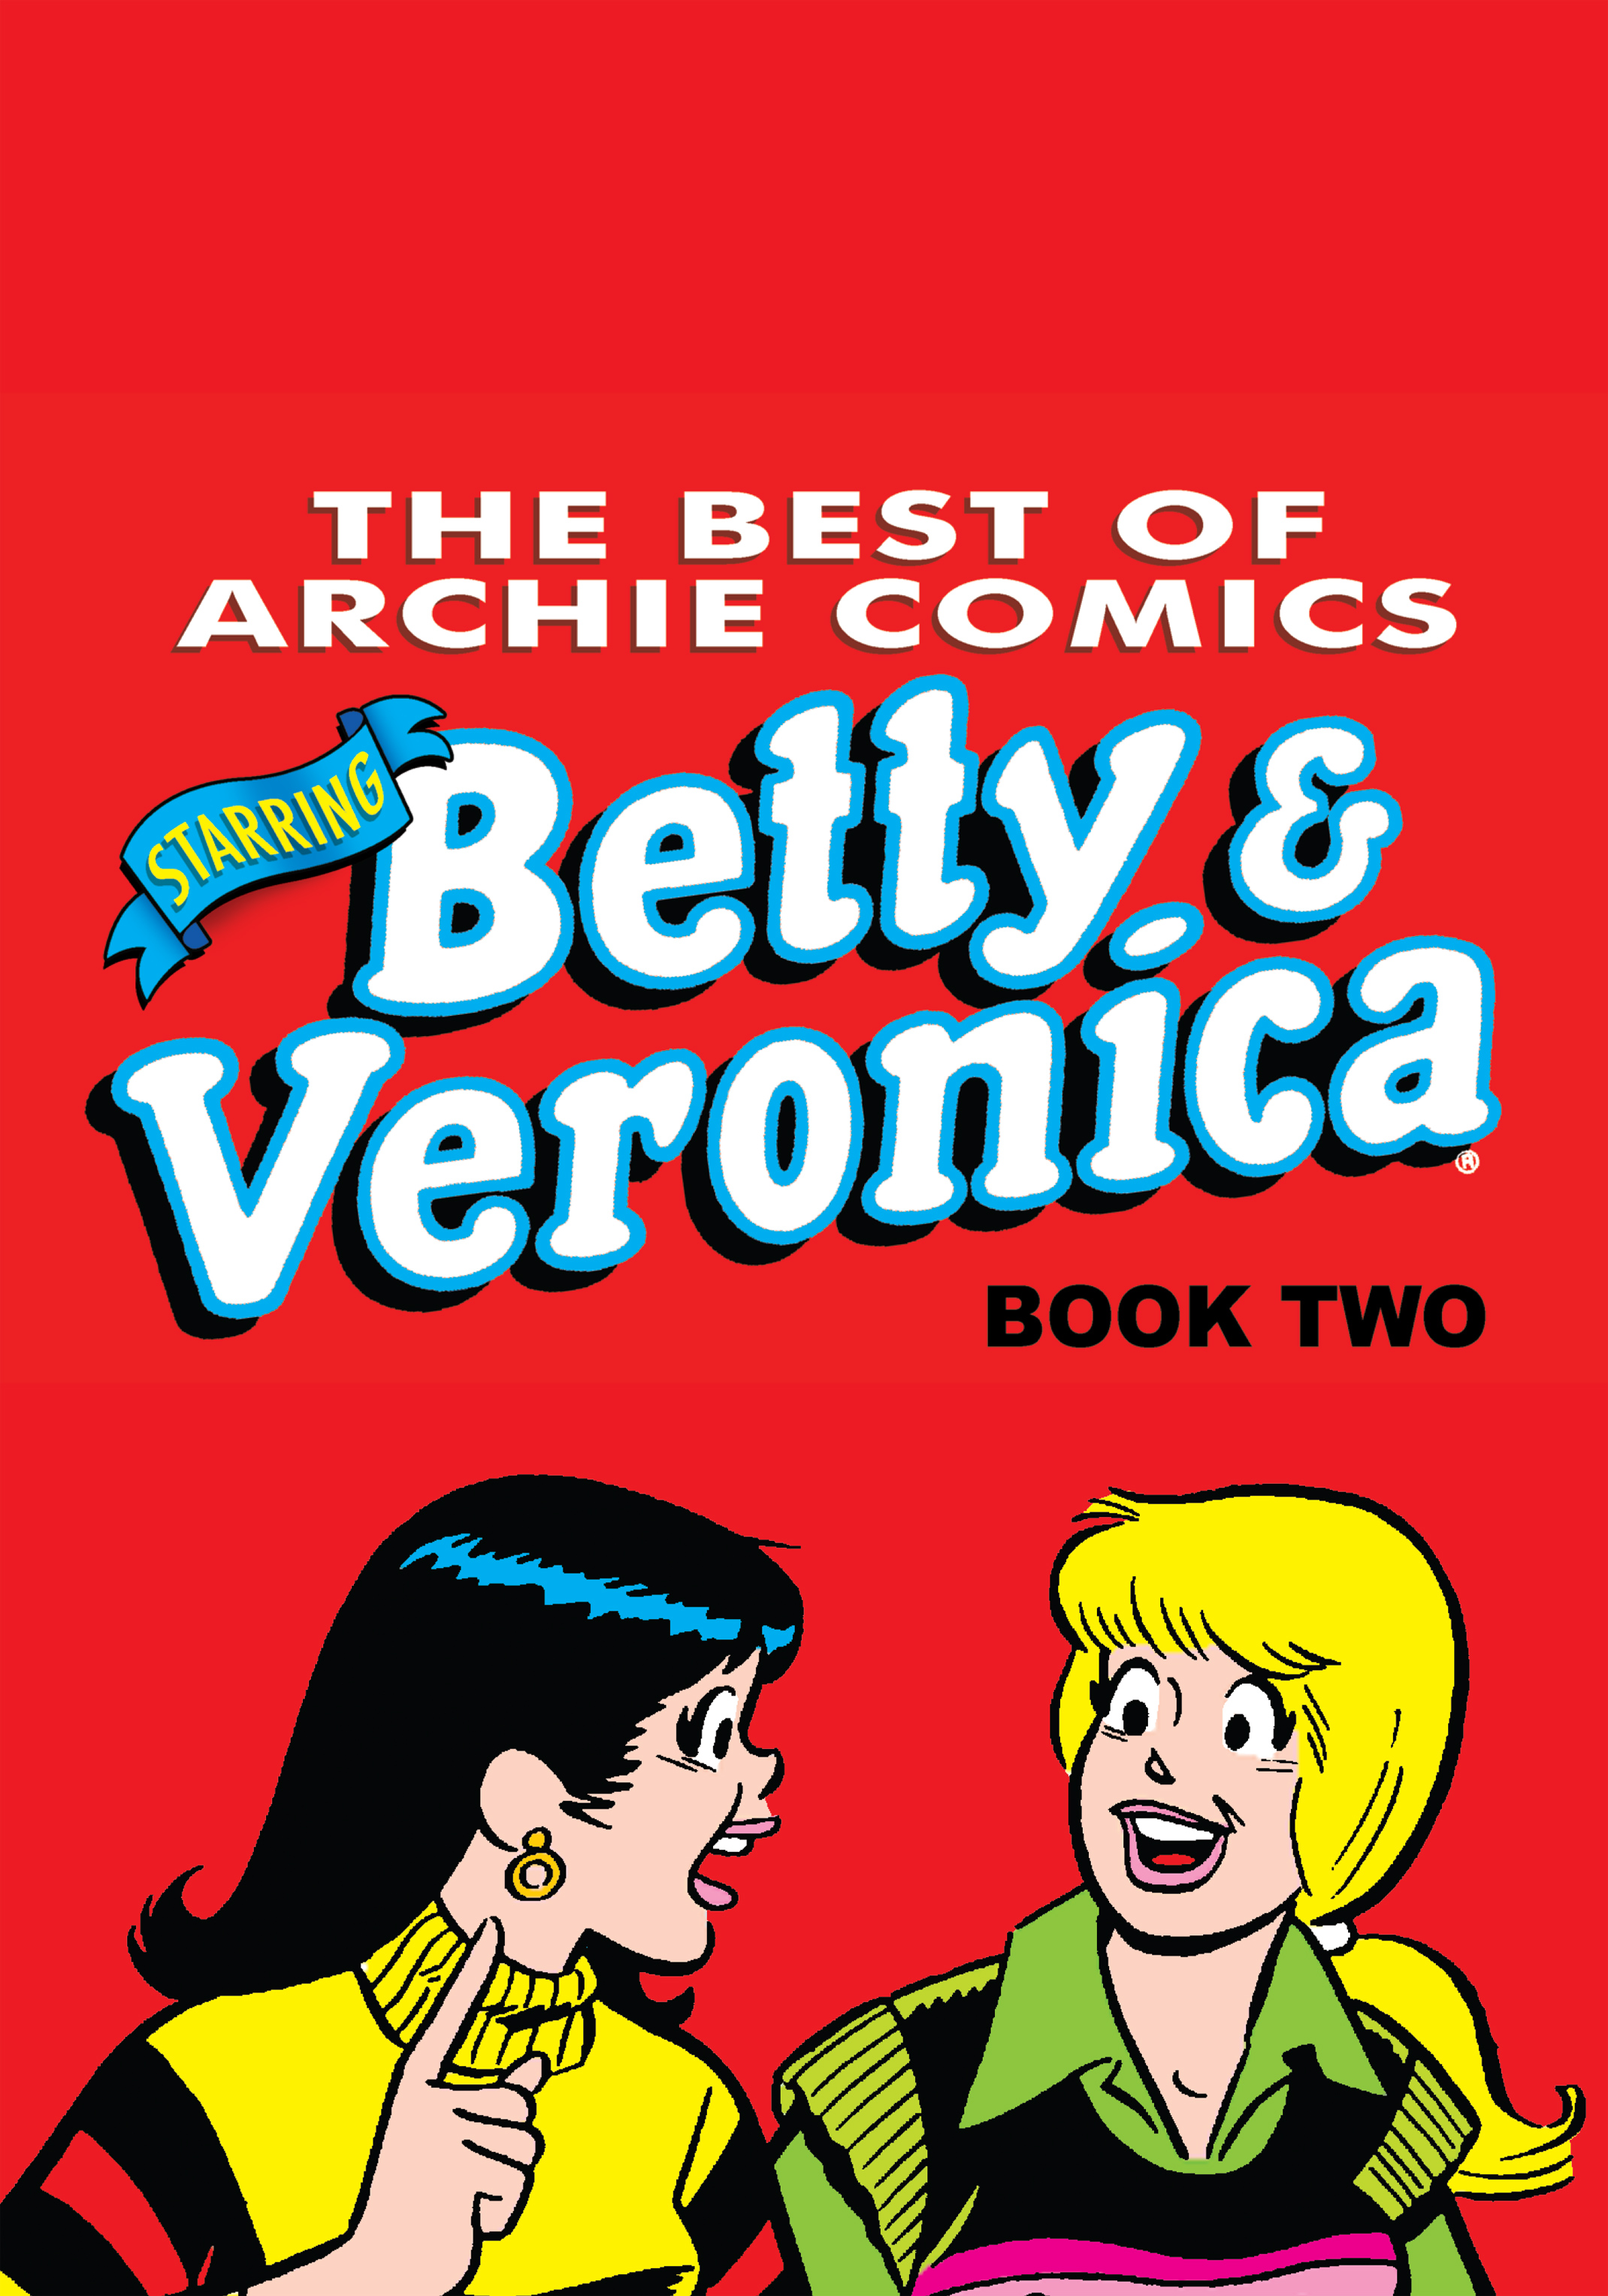 Read online The Best of Archie Comics: Betty & Veronica comic -  Issue # TPB 2 (Part 1) - 3